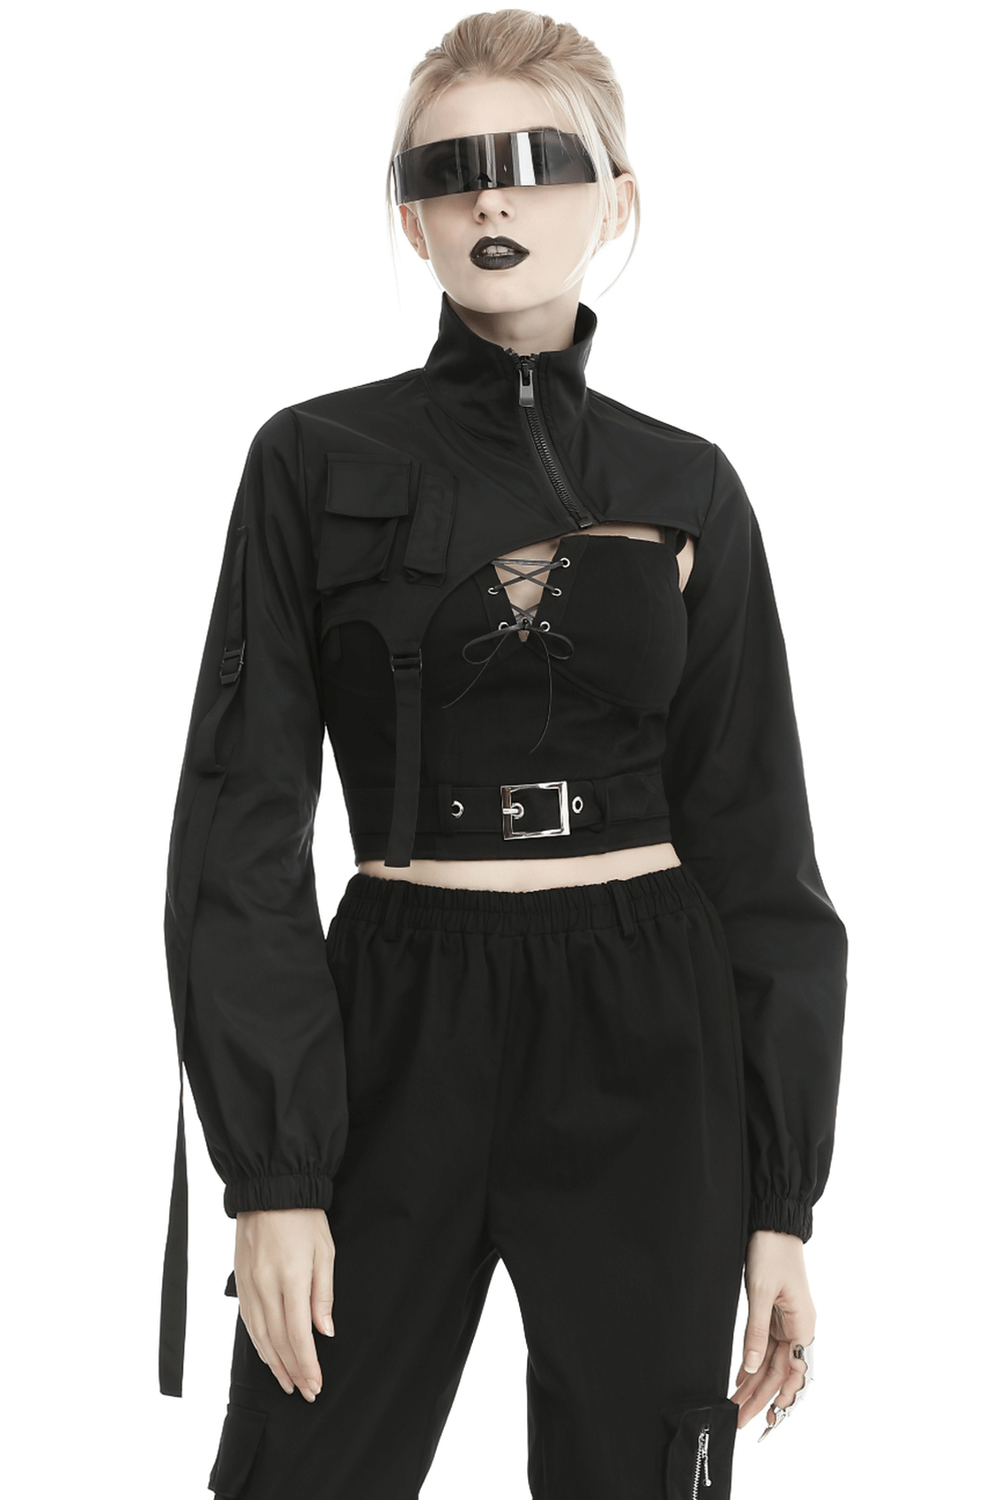 Edgy Long Sleeves Crop Jacket with Zipper and Pockets